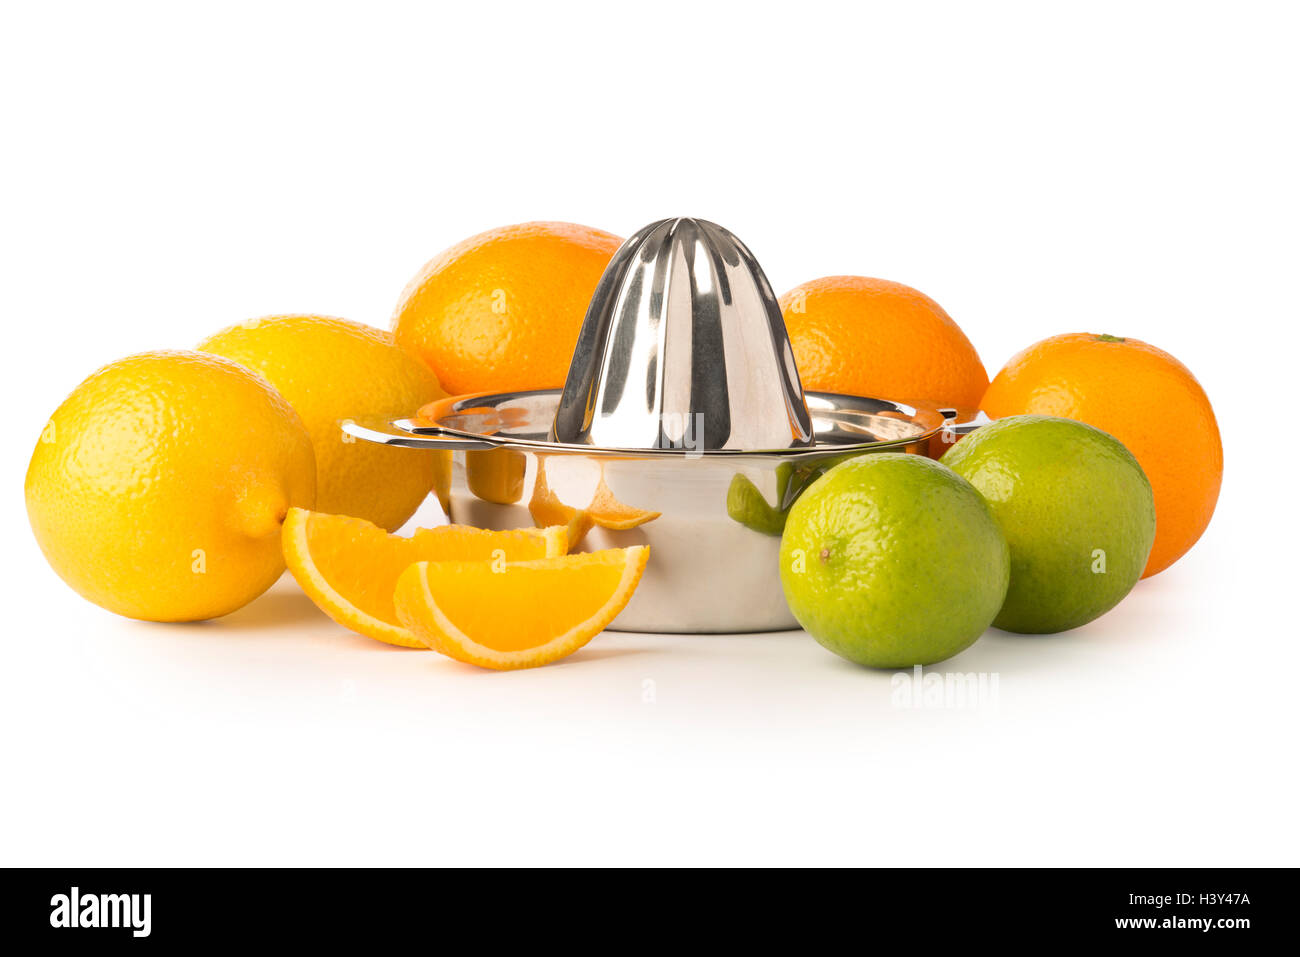 Cutout of a stainless steel orange or citrus hand juicer surrounded by whole lemons, oranges, lime, and a pair of orange slices. Stock Photo